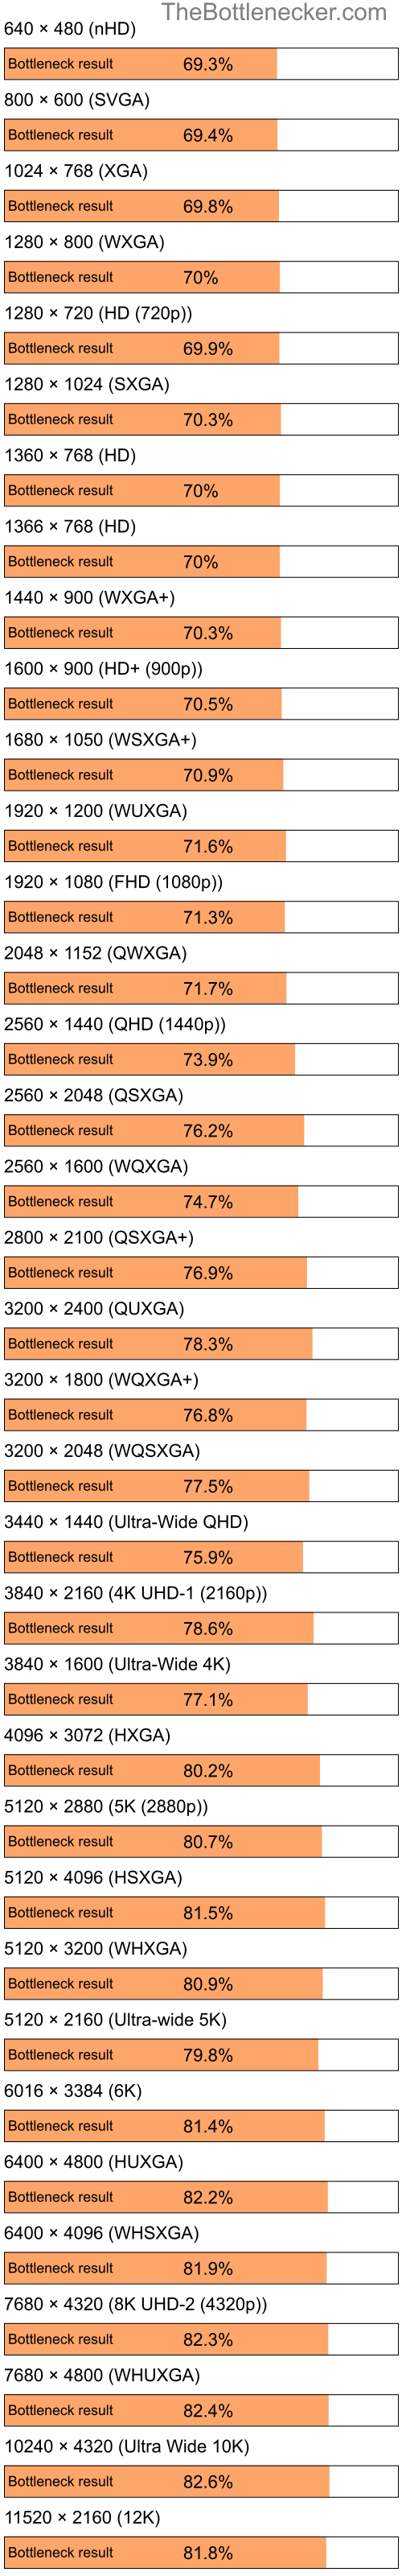 Bottleneck results by resolution for Intel Celeron M and NVIDIA GeForce 8300 in Graphic Card Intense Tasks